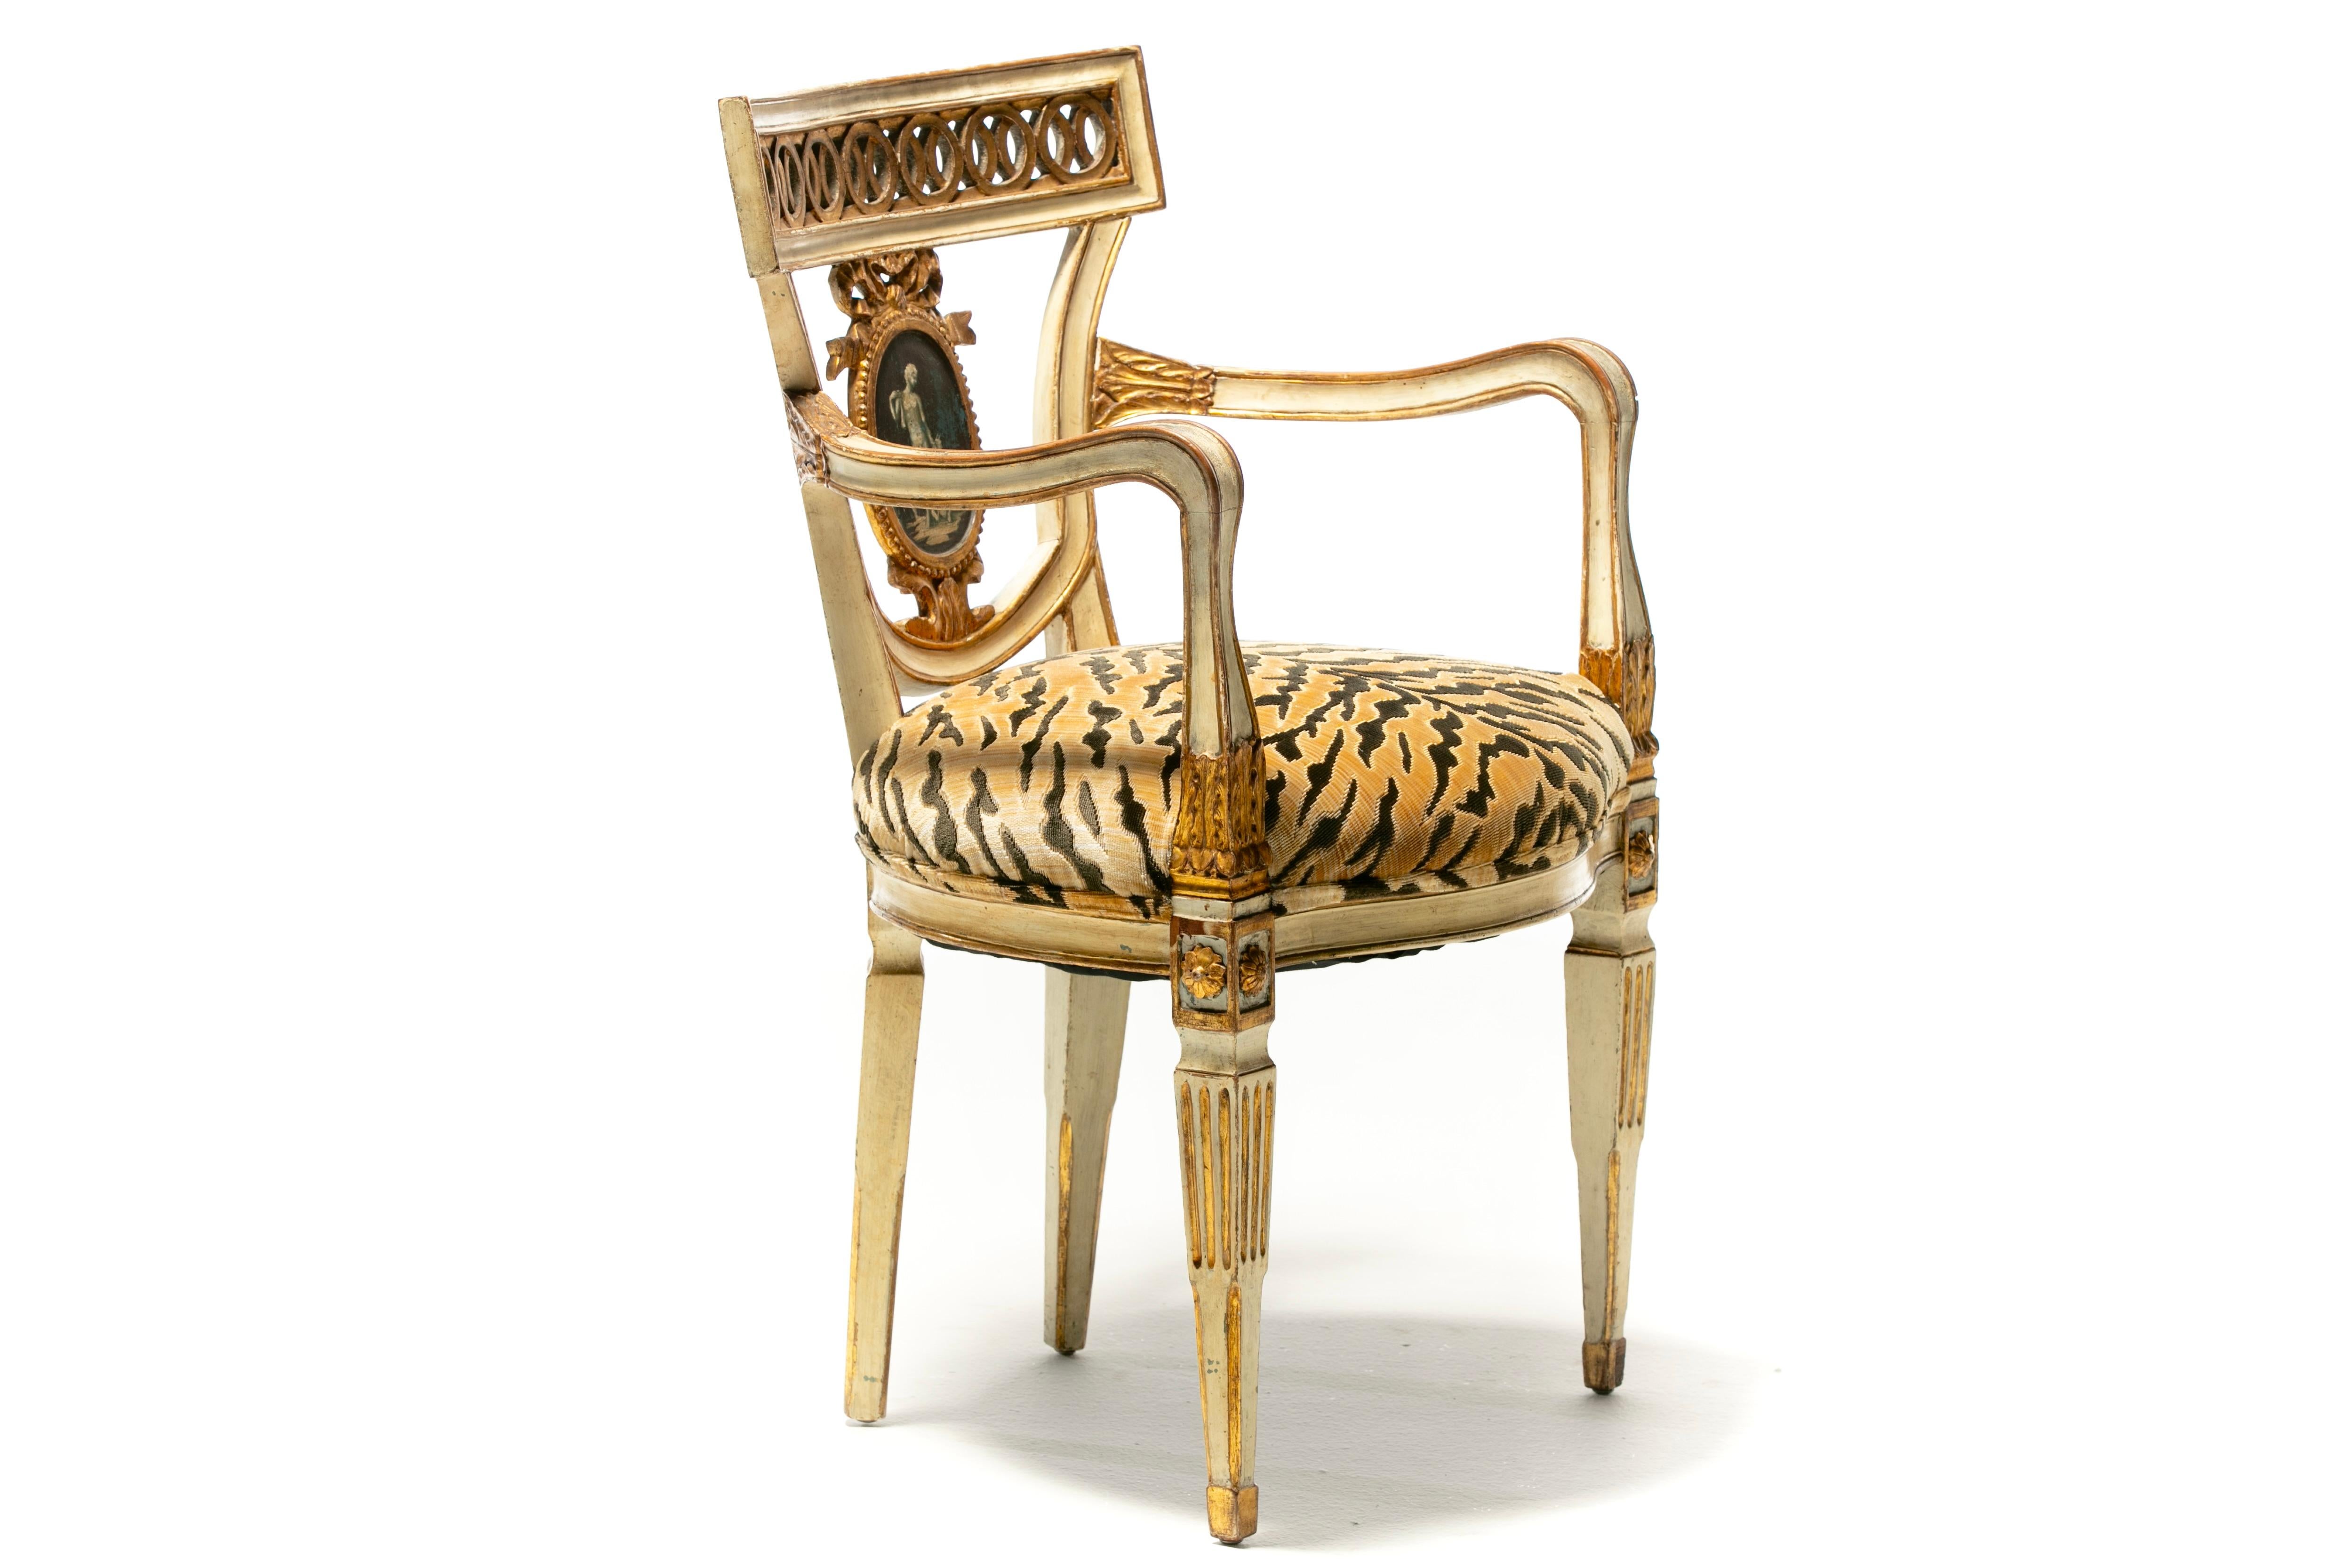 Set of 8 Italian Neoclassical Dining Chairs with Painted Murals & Tiger Velvet For Sale 3